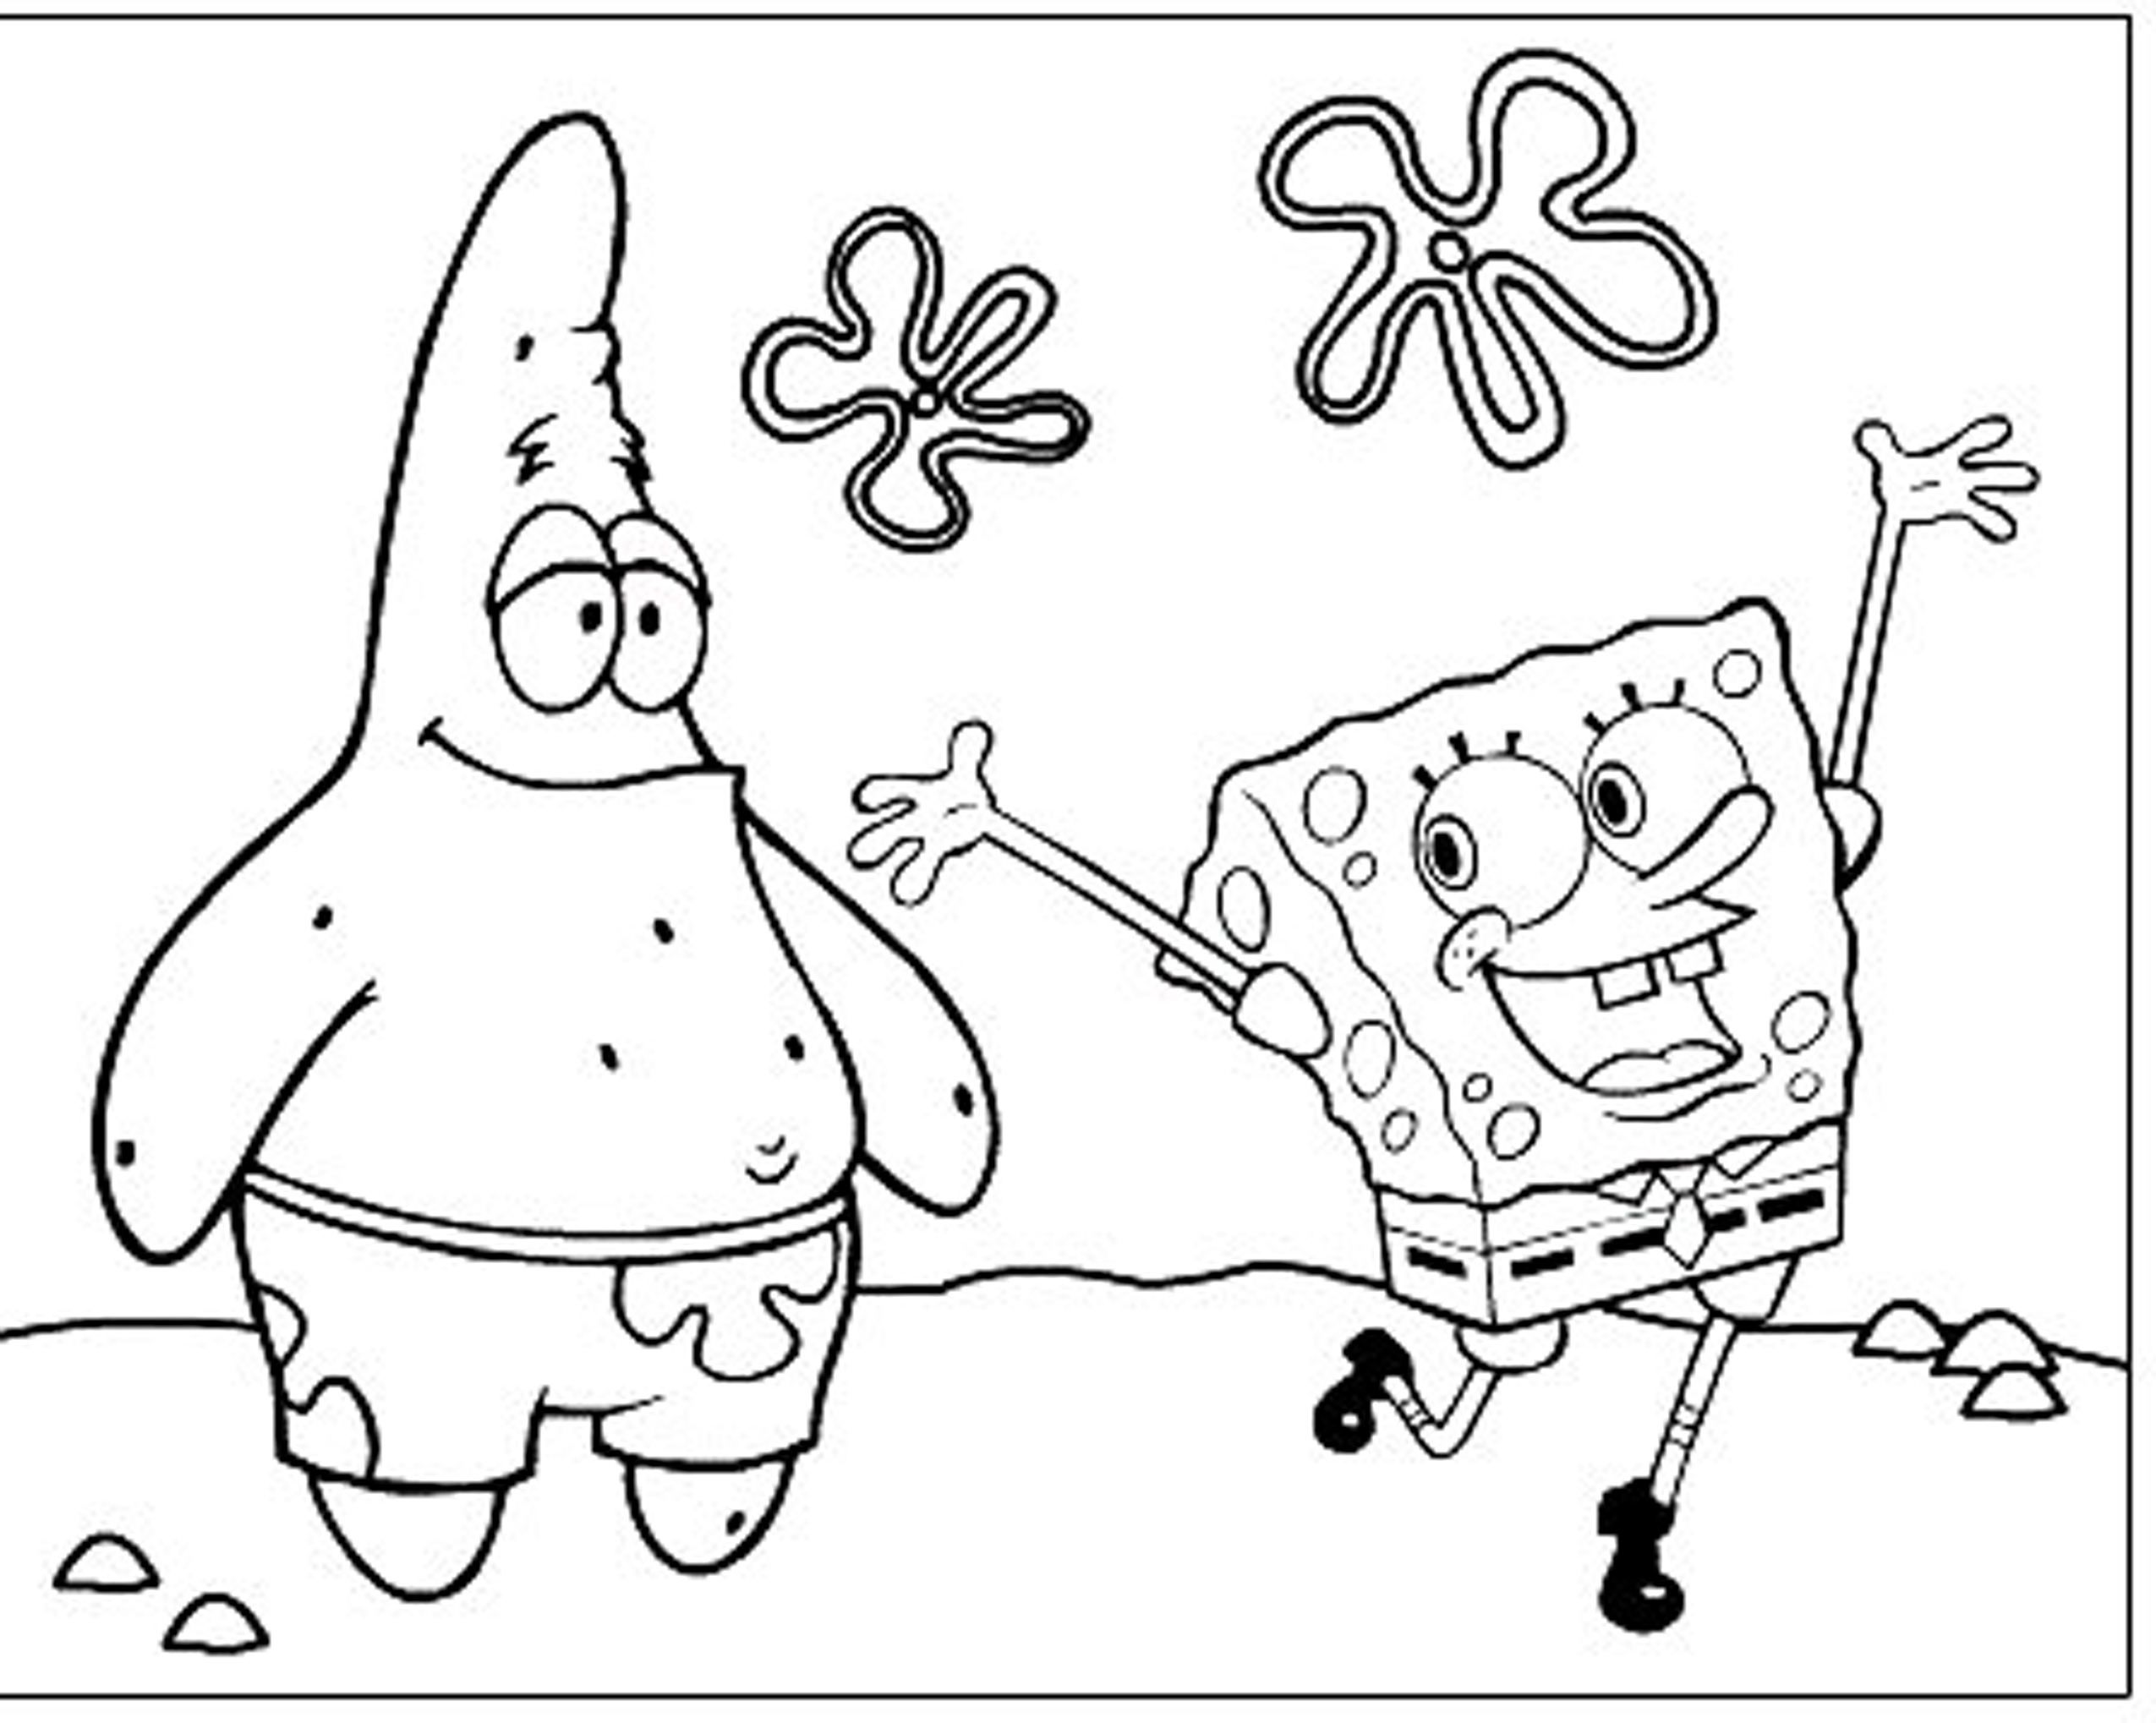 7 Pics of Spongebob And Patrick Christmas Coloring Pages Colored ...